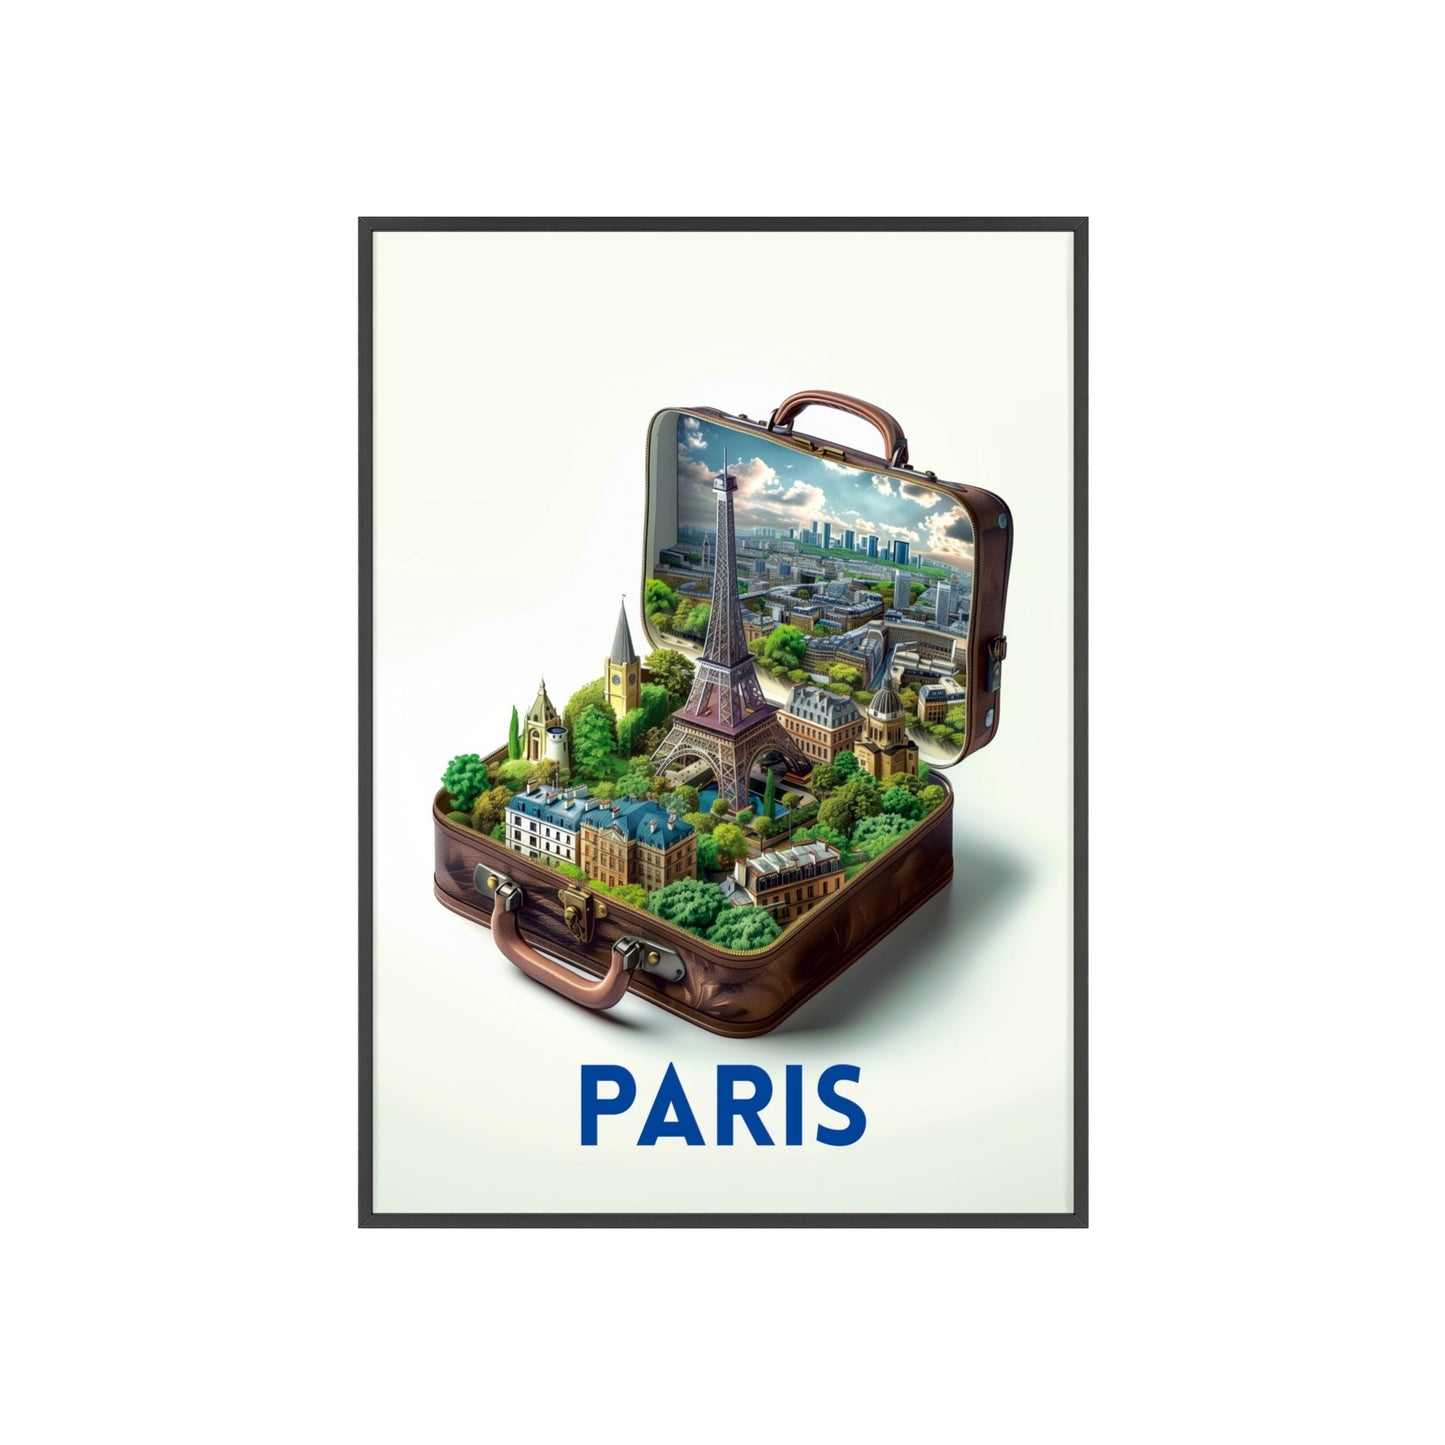 Paris in a Suitcase: Elegant Travel Poster for Timeless Home Decor